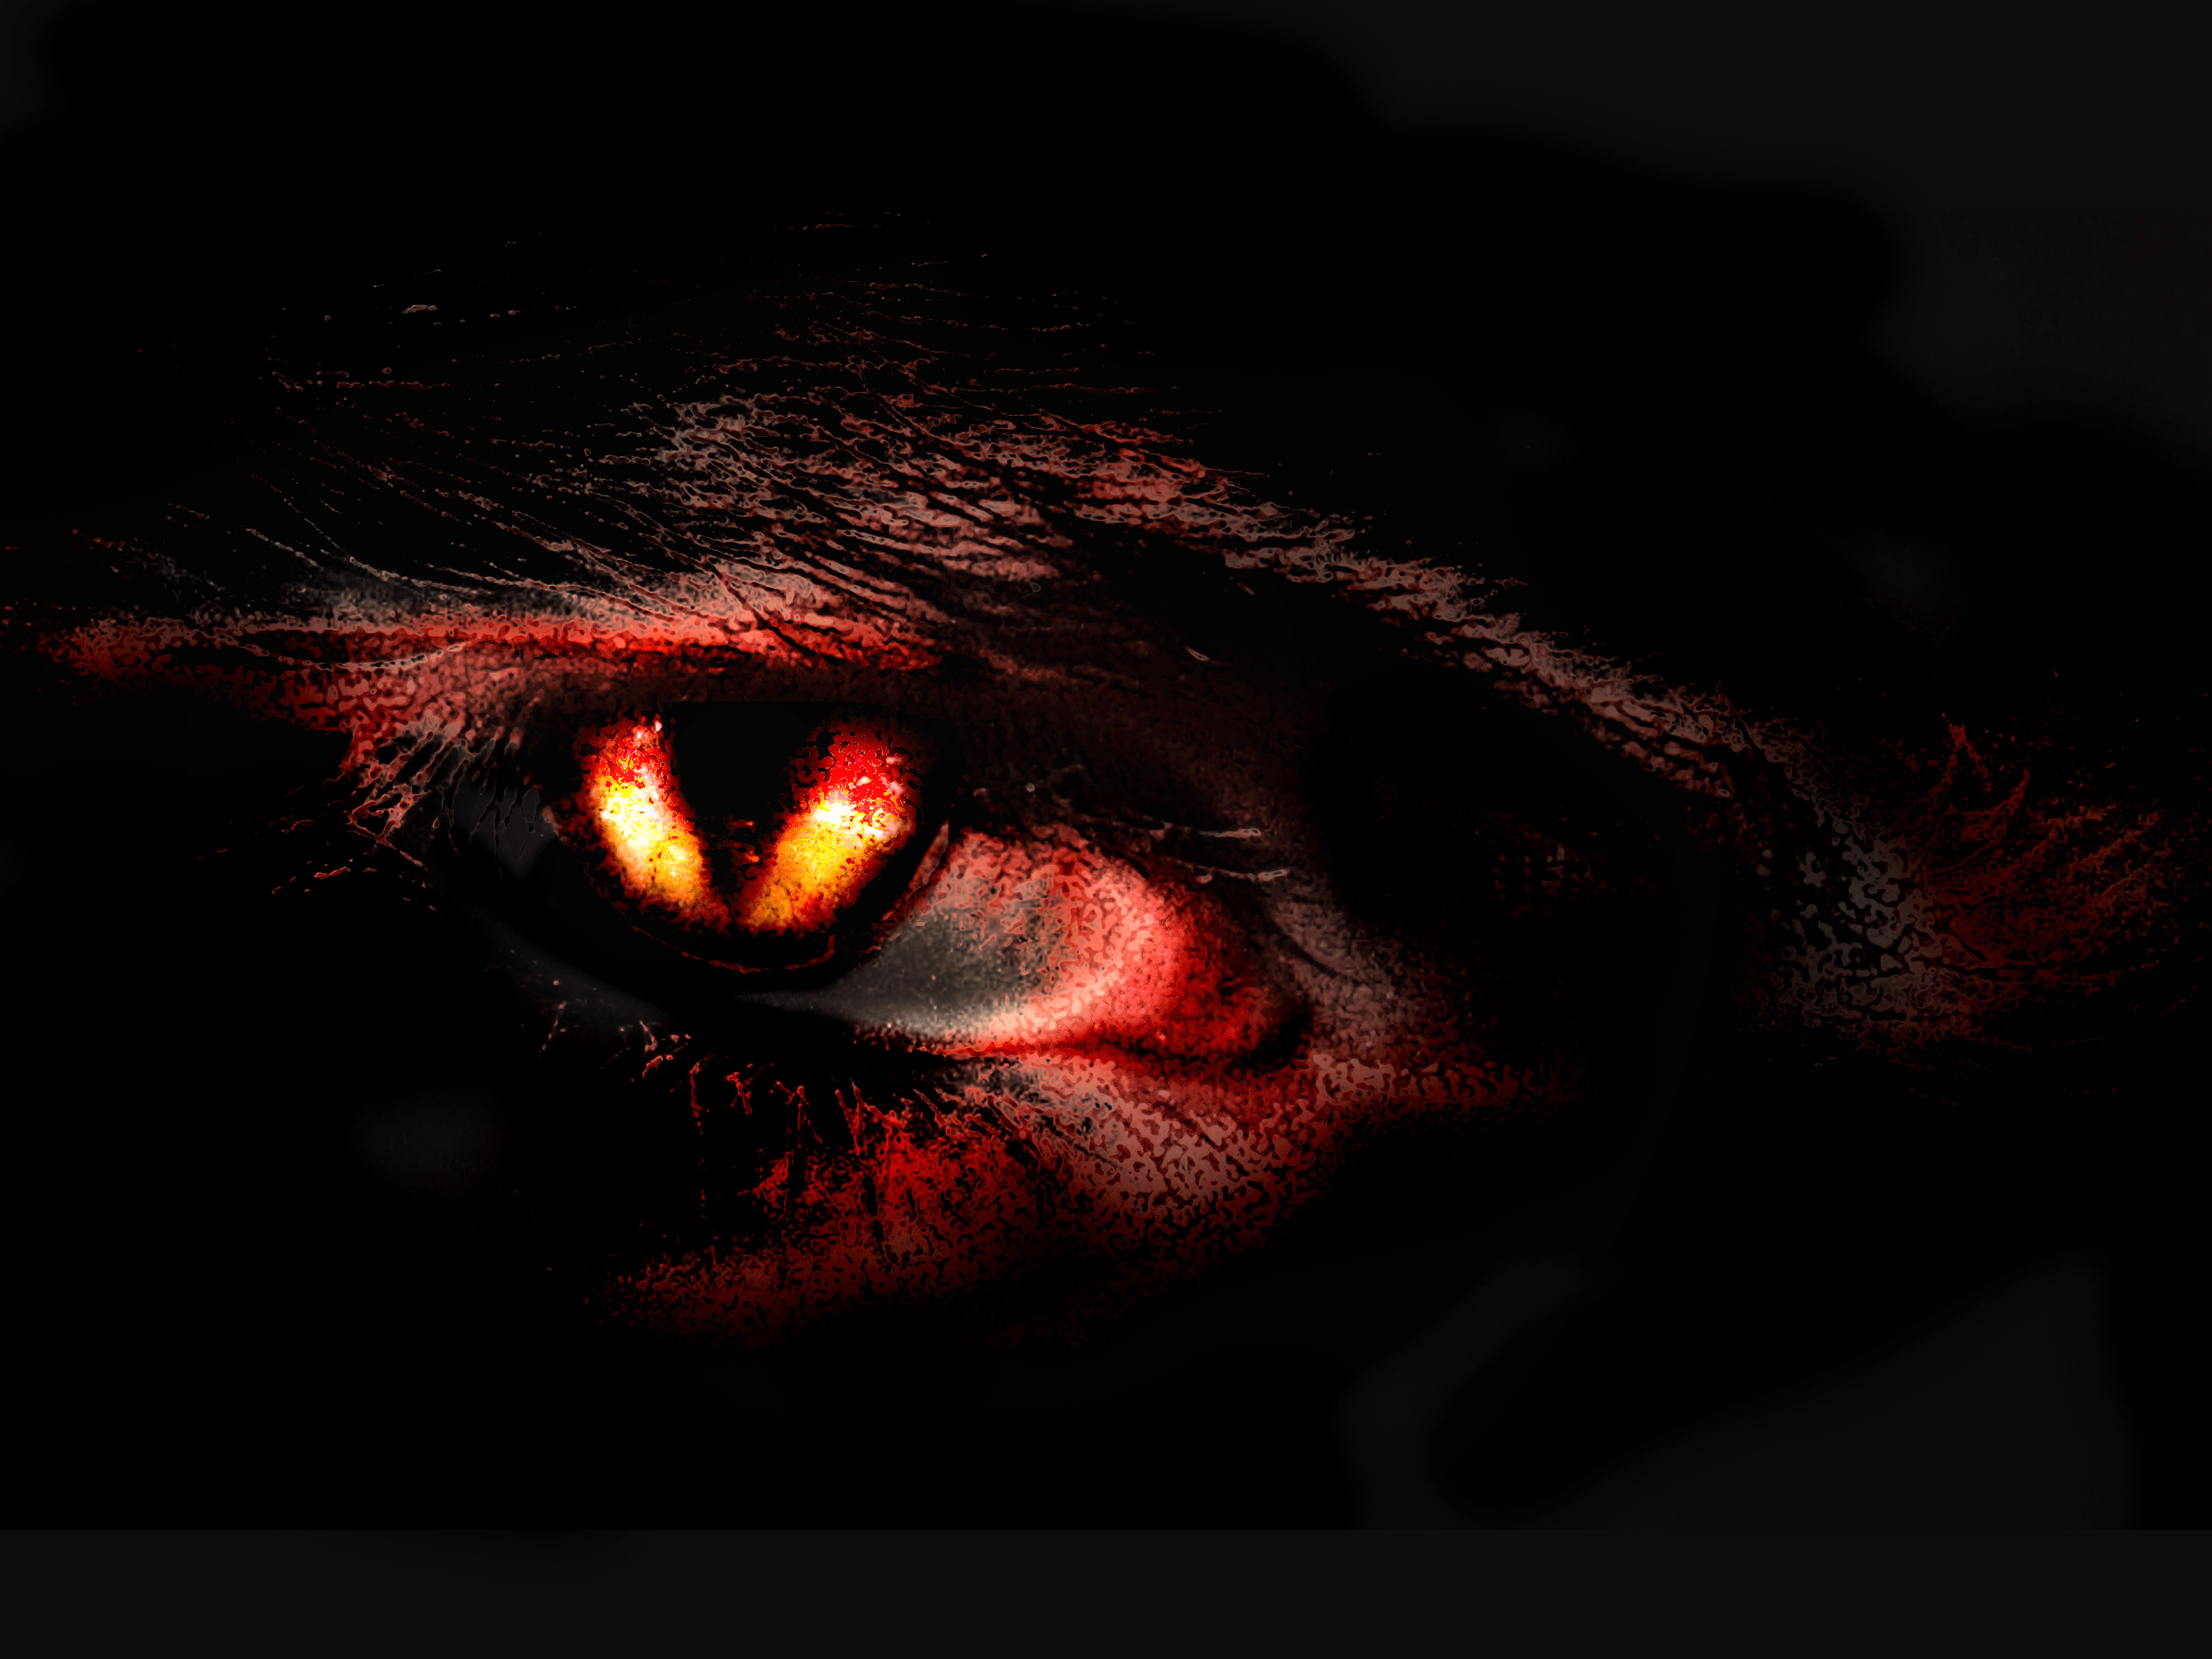 Bloody Eyes Wallpaper, image collections of wallpaper